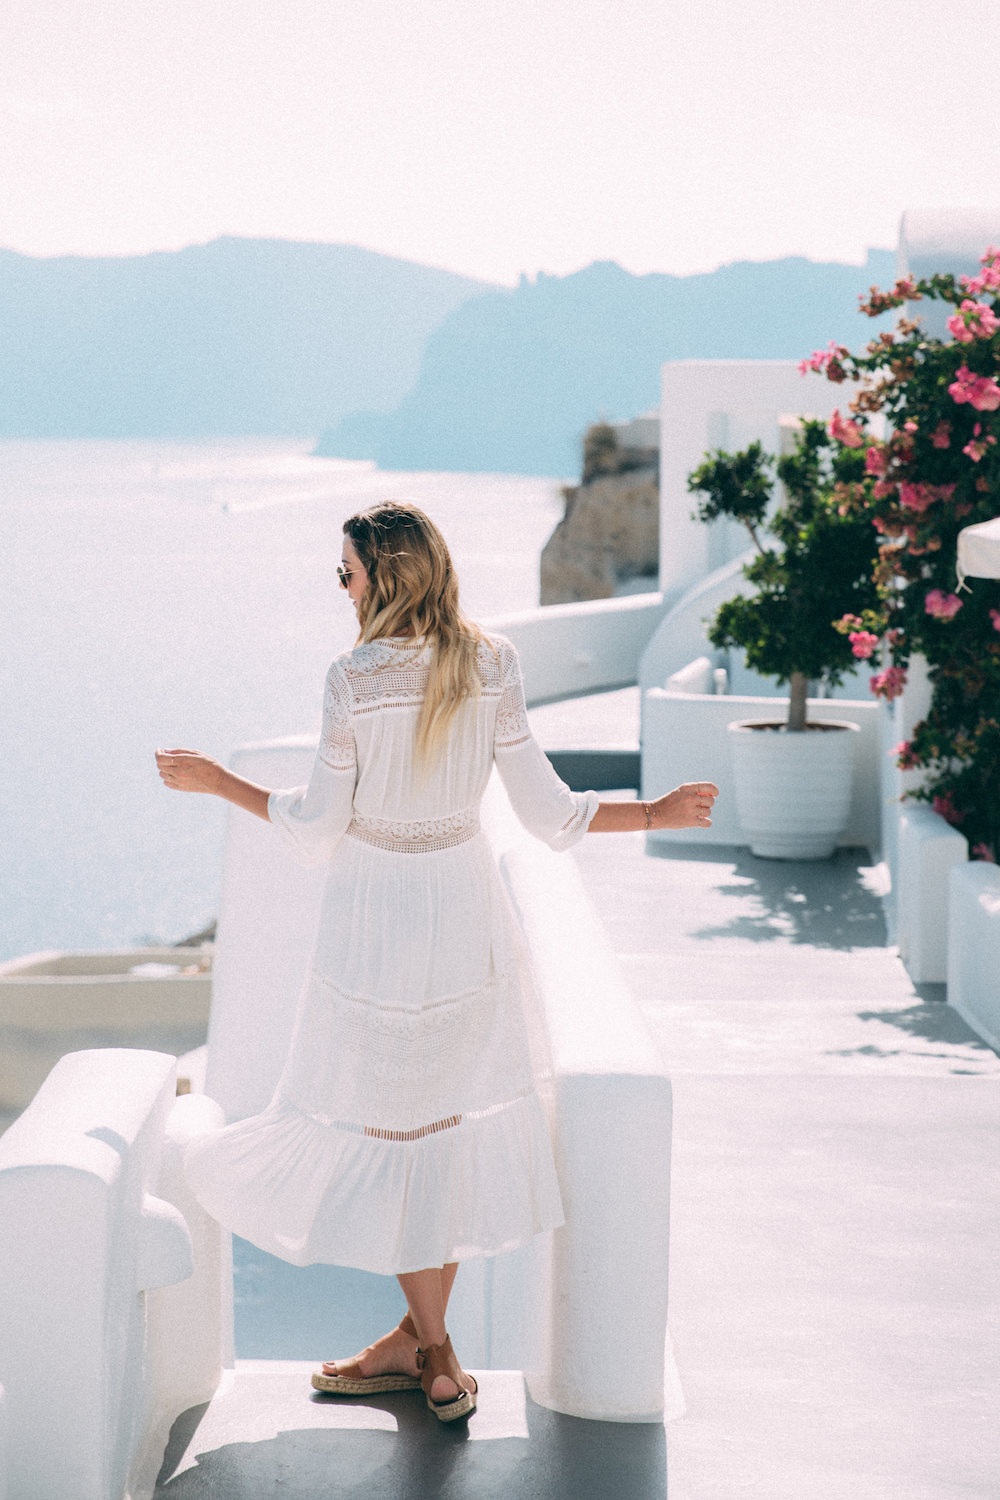 Dash of Darling shares her travels from Oia, Santorini Greece with Royal Caribbean Cruises while wearing a white Spell Designs dress.